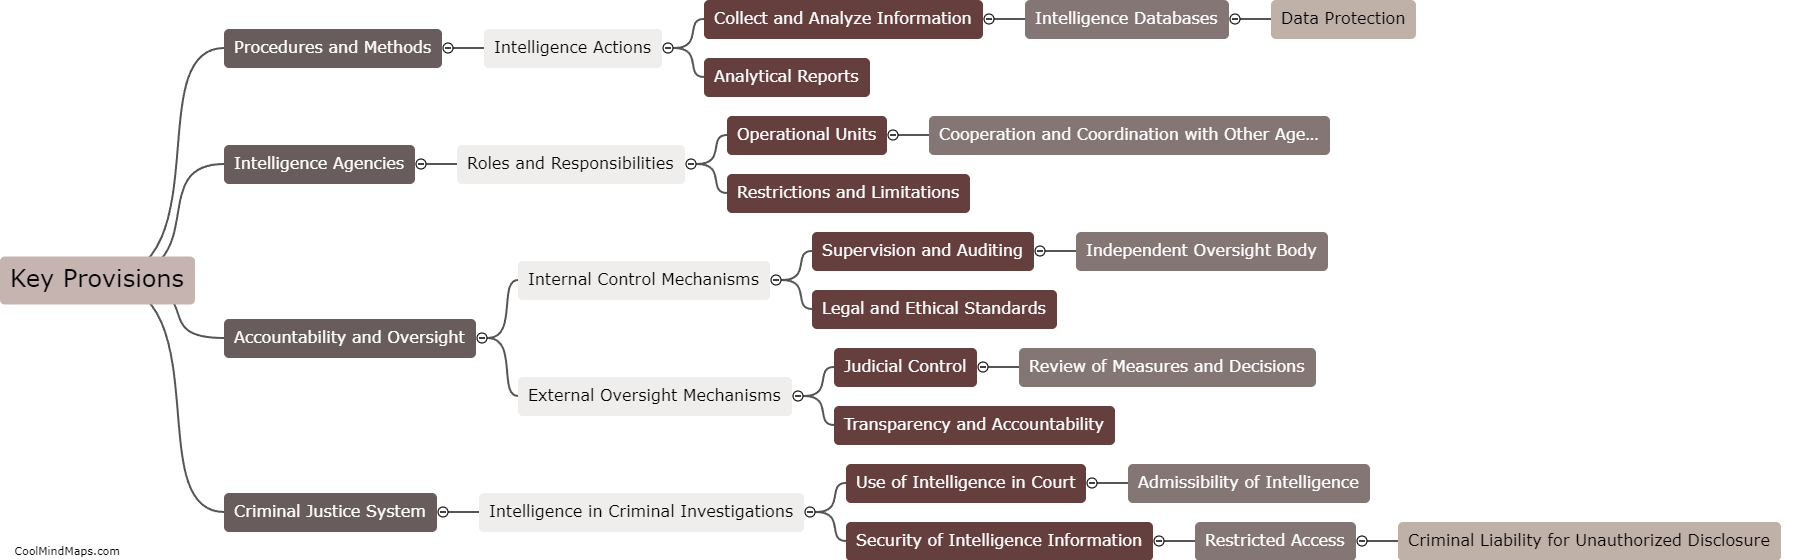 What are the key provisions of the Ley de Inteligencia Criminal Argentina?